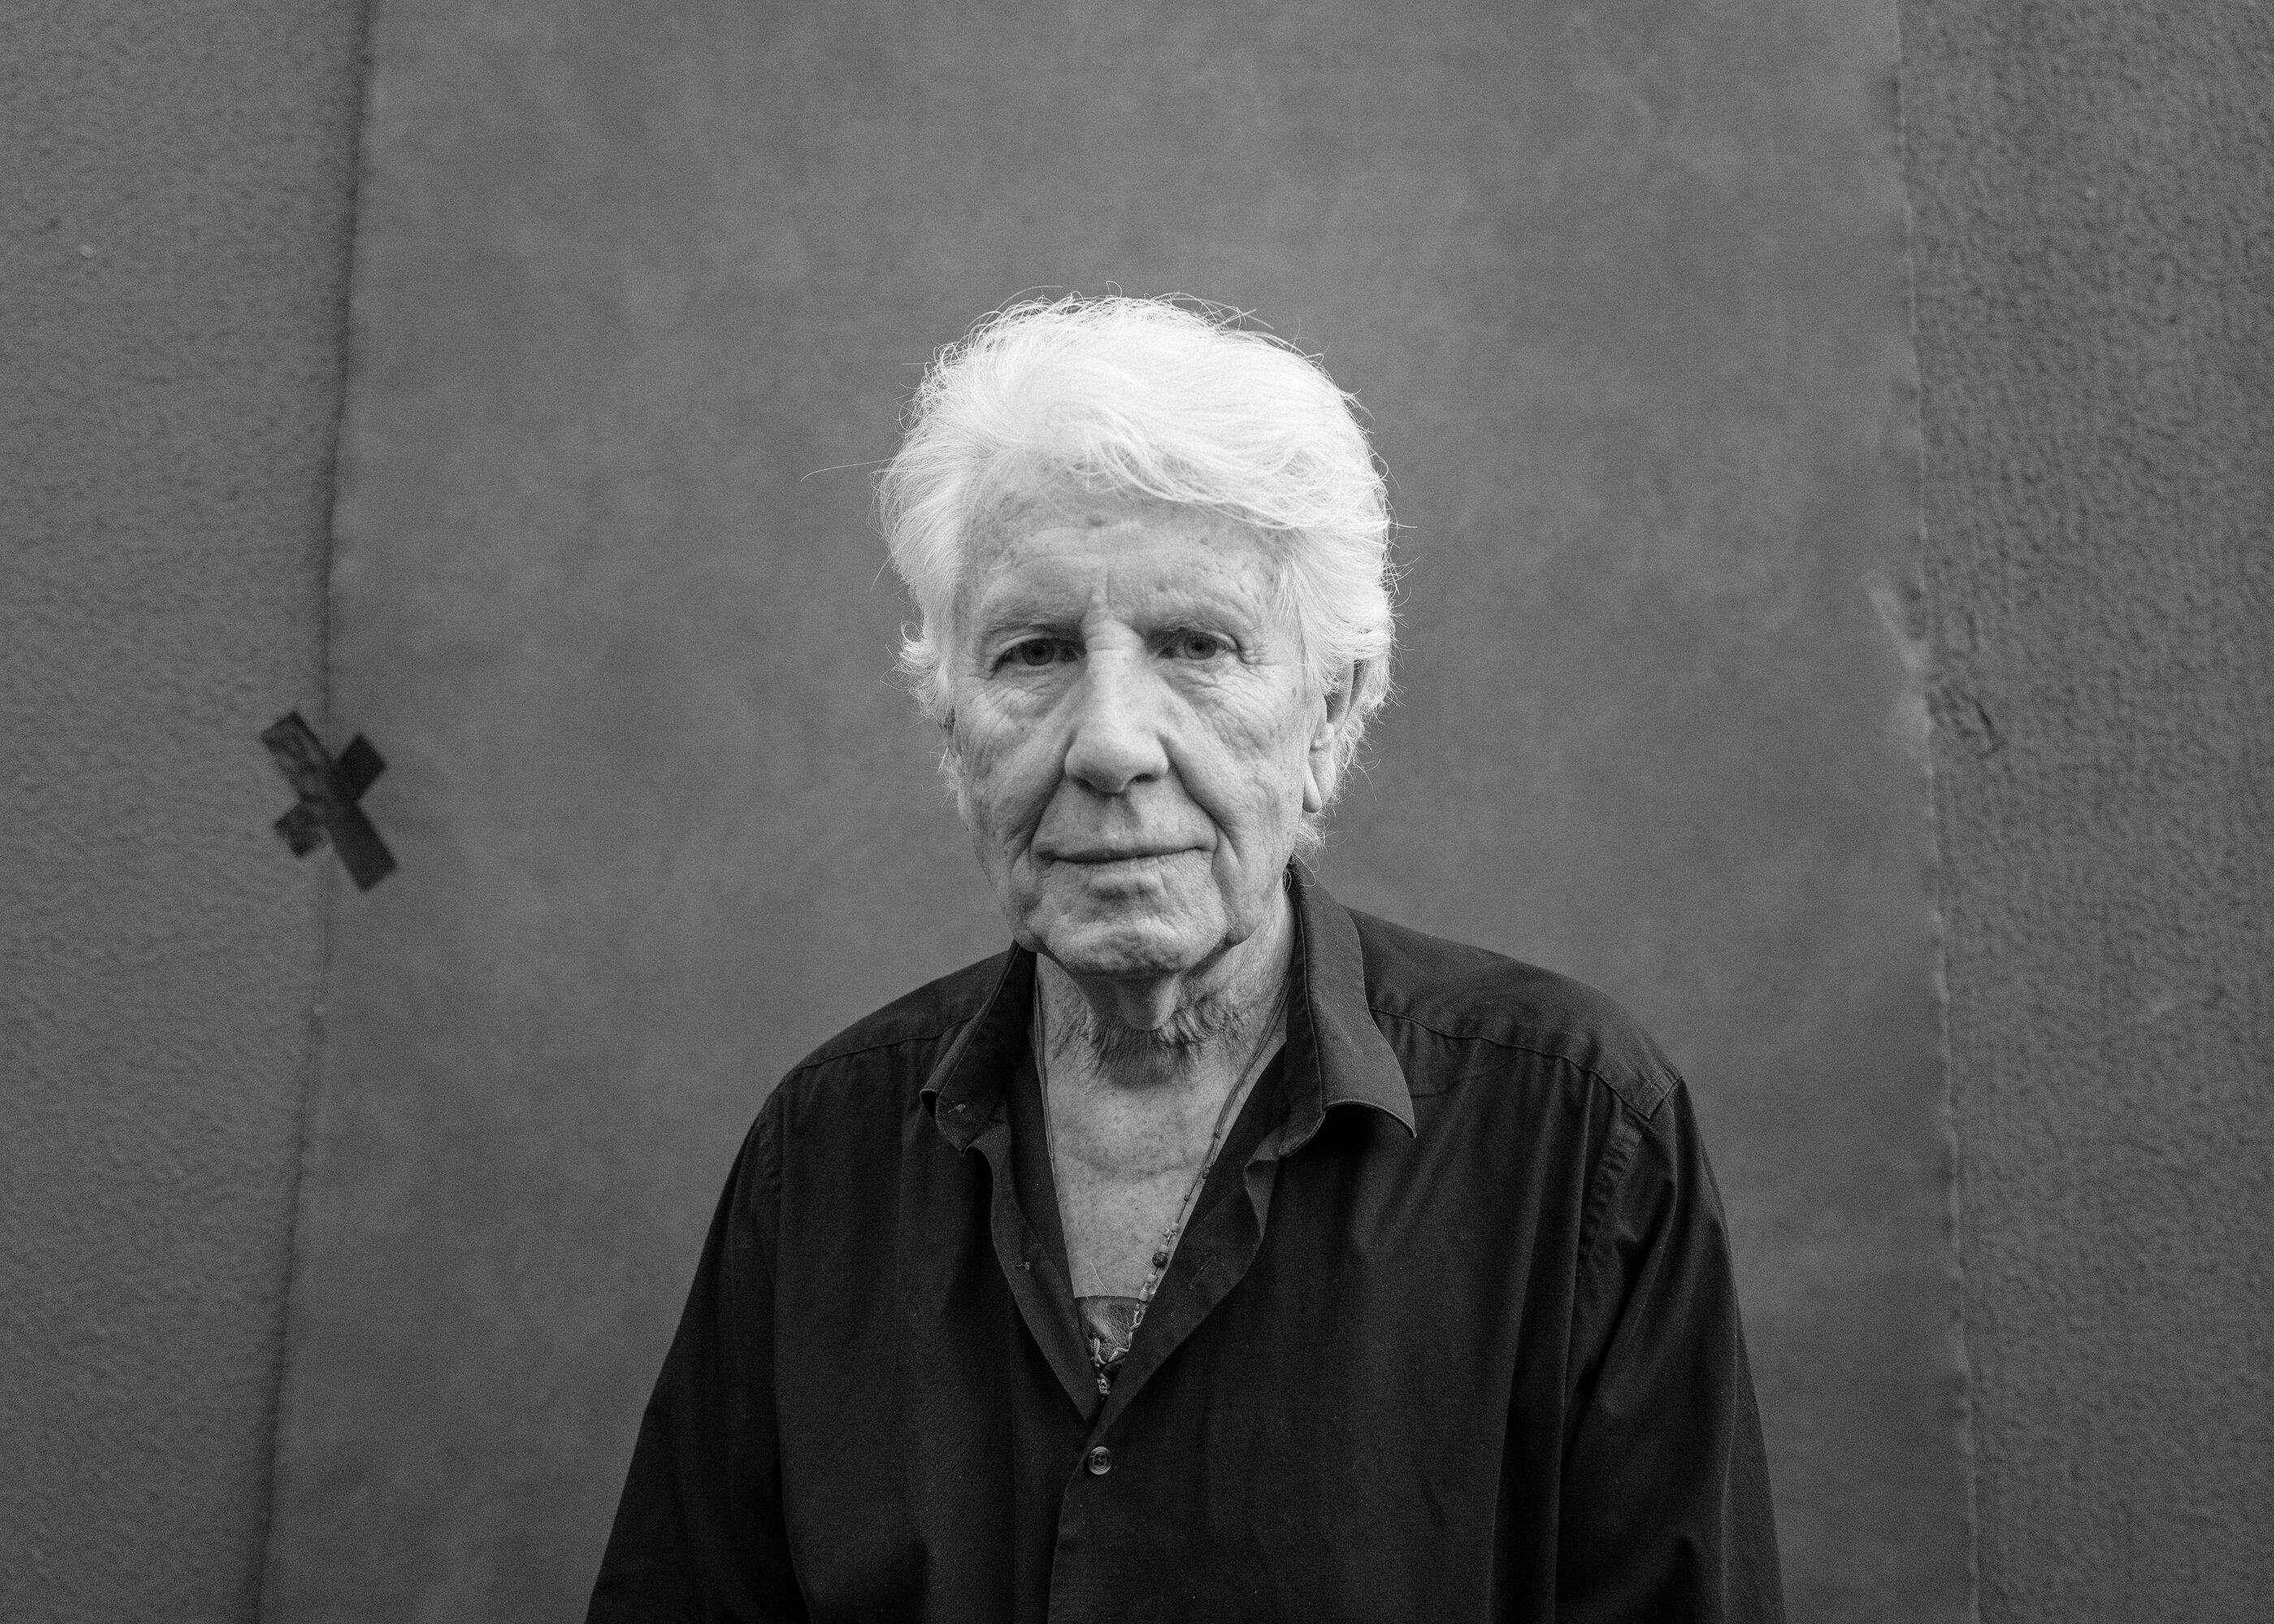 Graham Nash on How Drugs ‘Completely’ Changed His Life